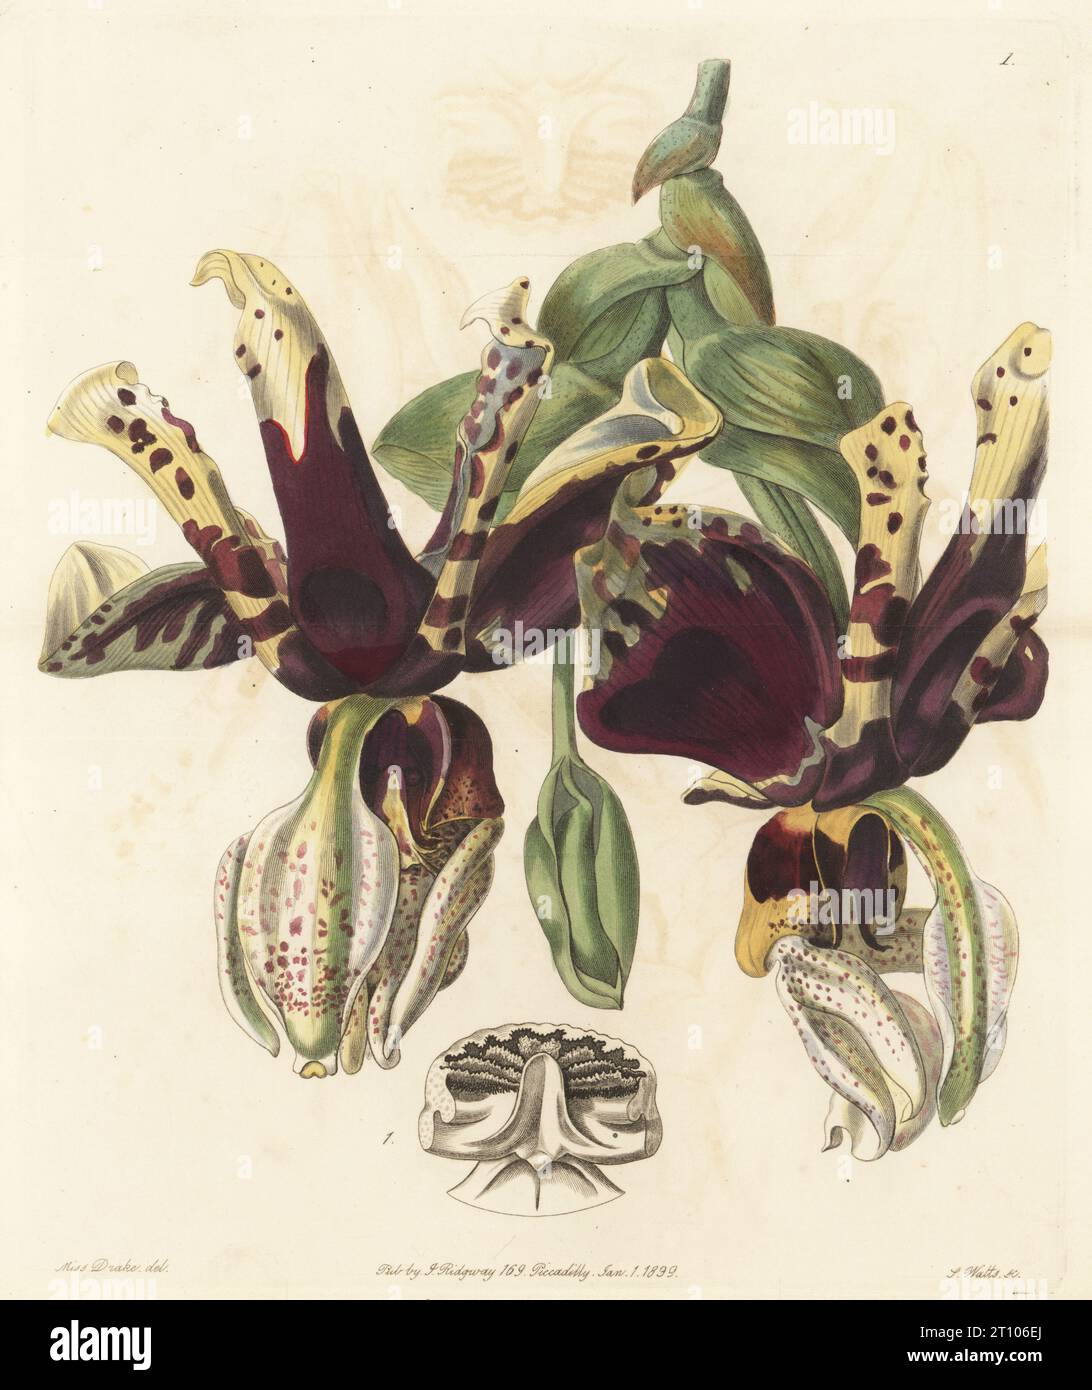 Tiger-flowered stanhopea orchid, Stanhopea tigrina. Native to Mexico, imported from Xalapa, raised by nurseryman William Rollisson of Tooting. Handcoloured copperplate engraving by Stephen Watts after a botanical illustration by Sarah Drake from Edwards’ Botanical Register, edited by John Lindley, published by James Ridgway, London, 1839. Stock Photo